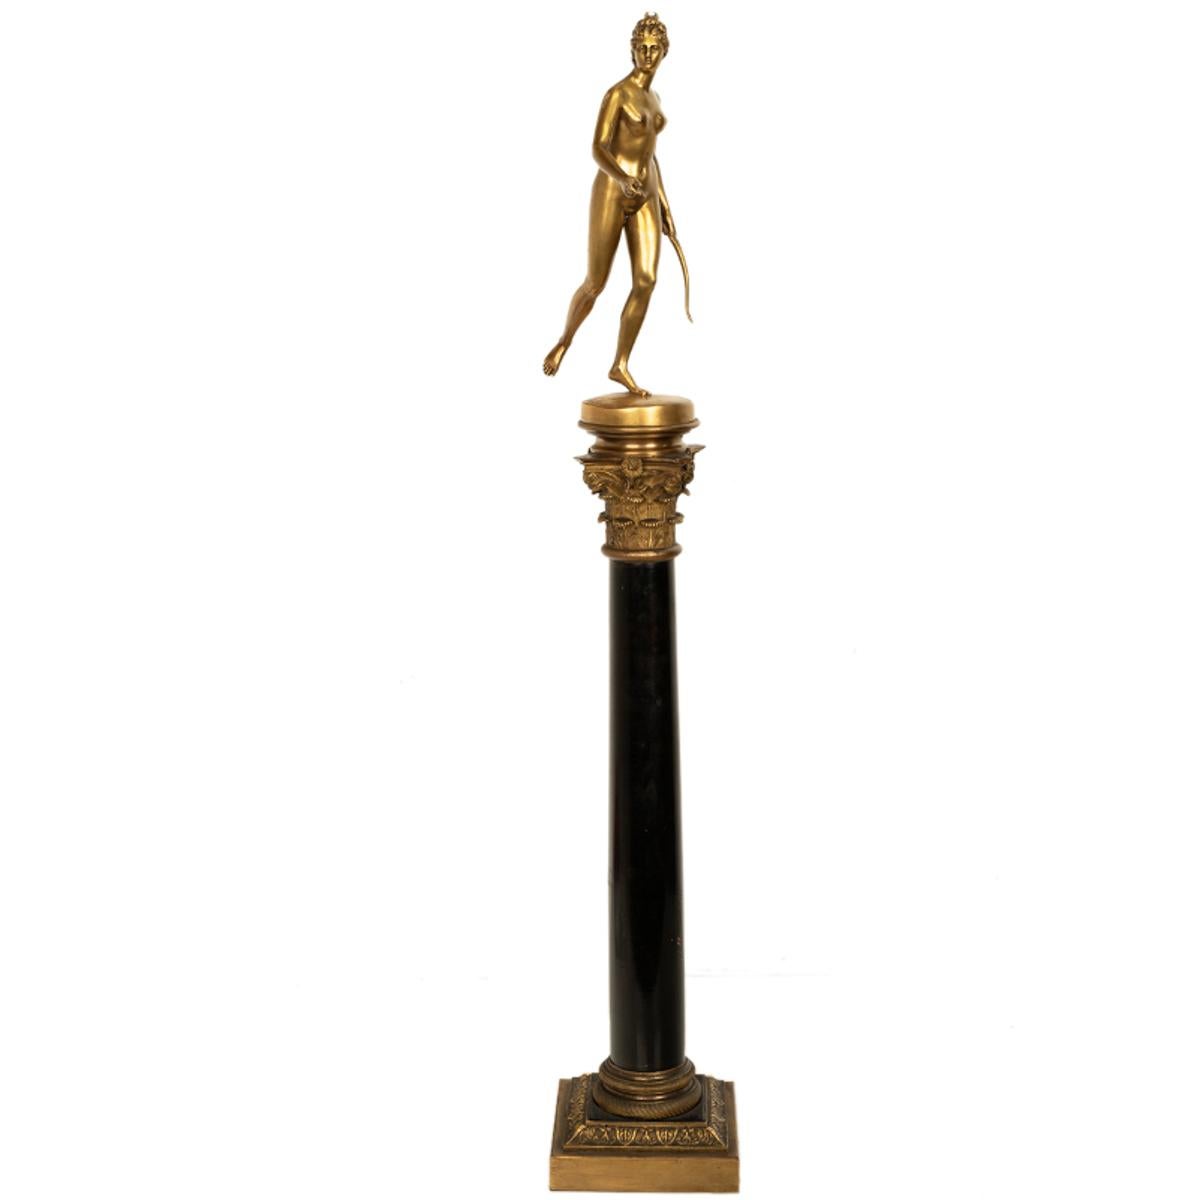 Antique French Grand Tour Gilt Bronze Statue on Column Diana the Huntress 1838 - French School Sculpture by Ferdinand Barbedienne